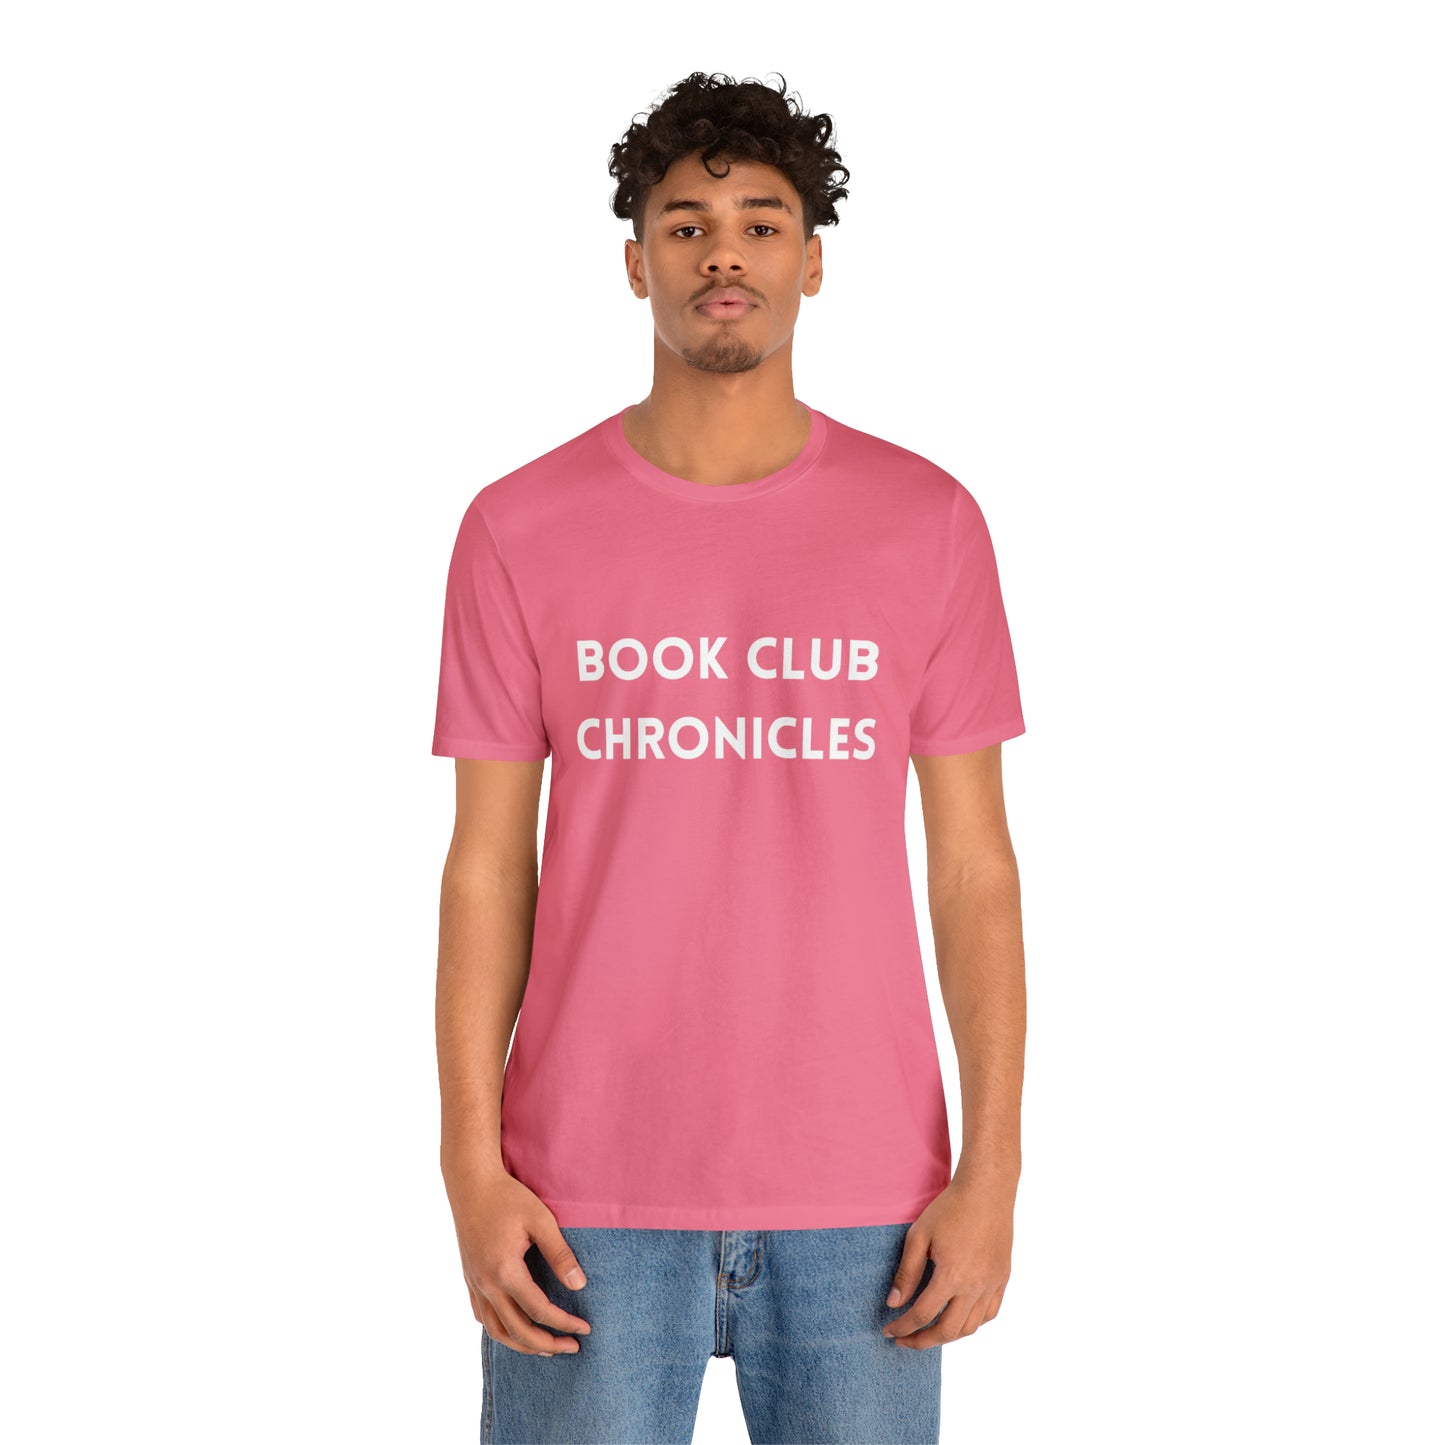 Bookworm Chic: 'Book Club Chronicles' T-Shirt for Avid Readers Charity Pink T-Shirt Petrova Designs